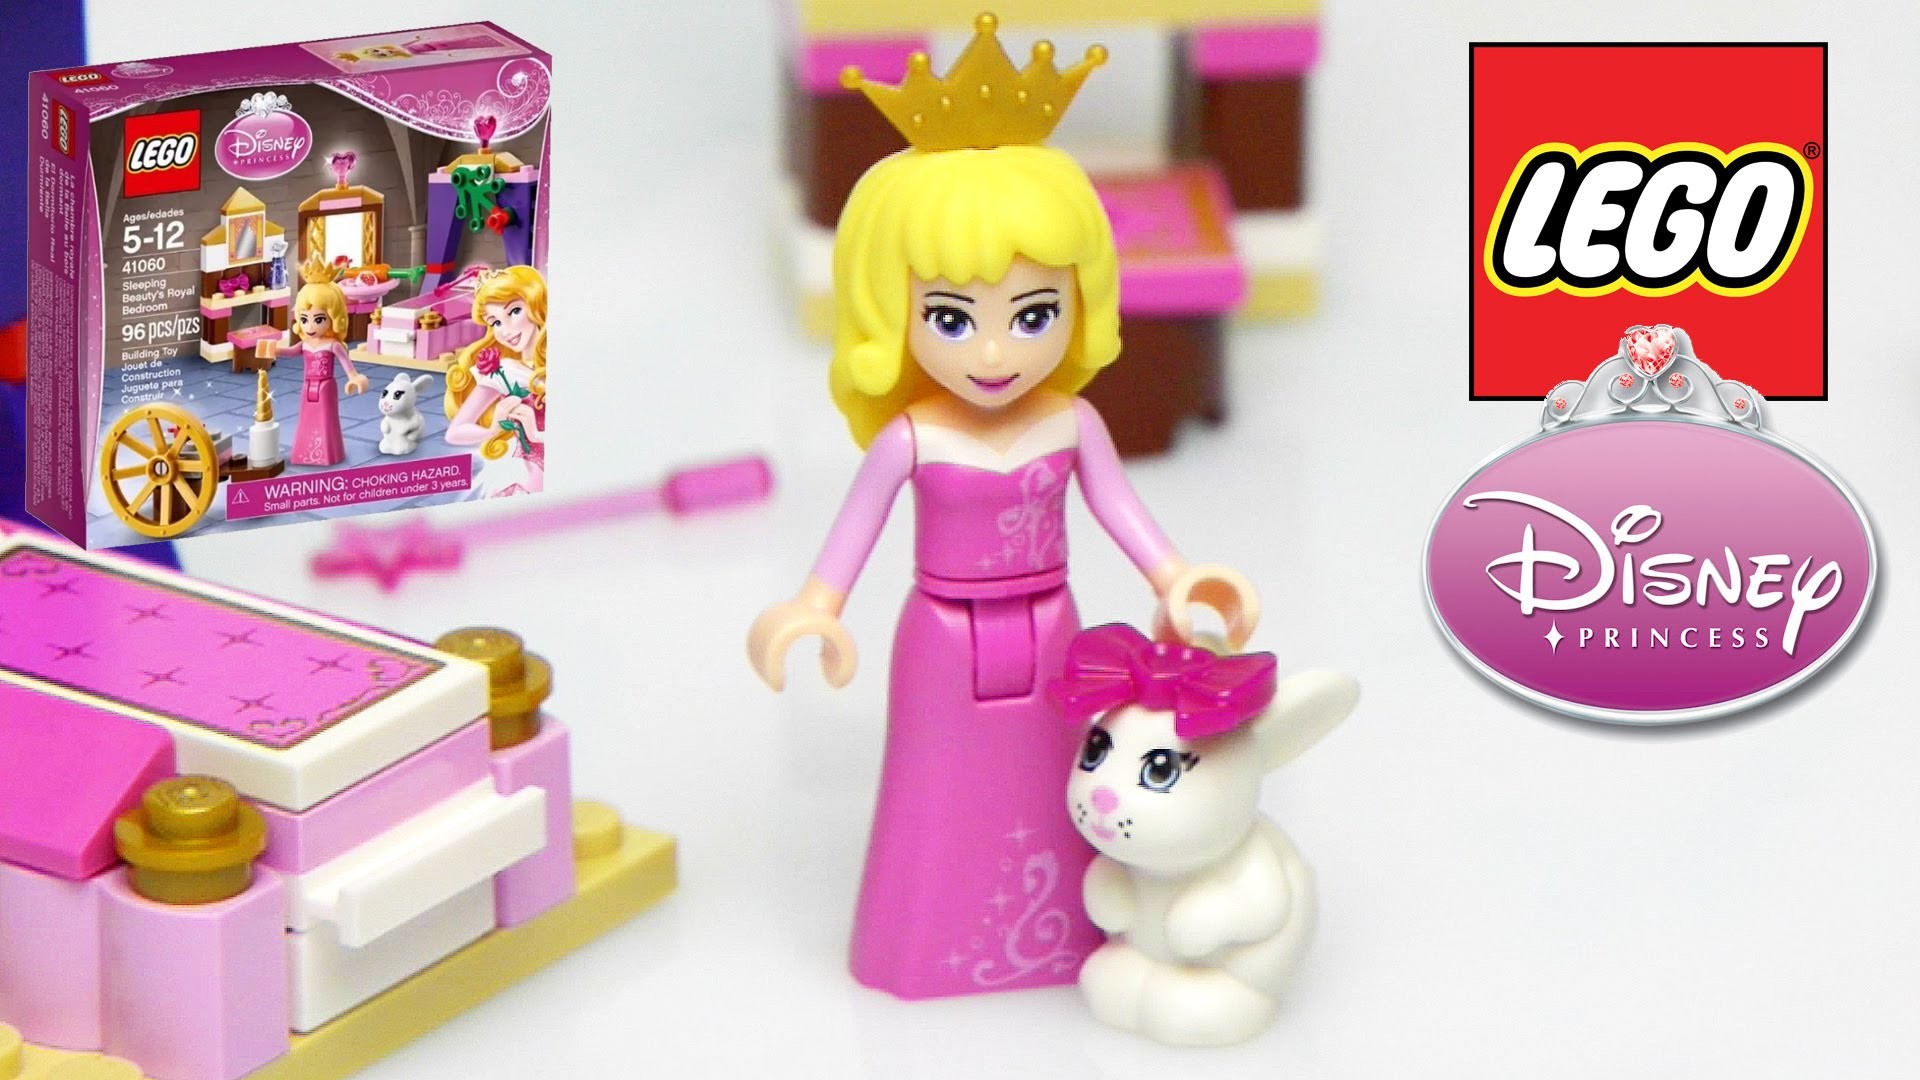 1920x1080 LEGO Disney Princess Sleeping Beauty's Royal Bedroom Unboxing Building and  Play 2015 - Kids Toys - YouTube